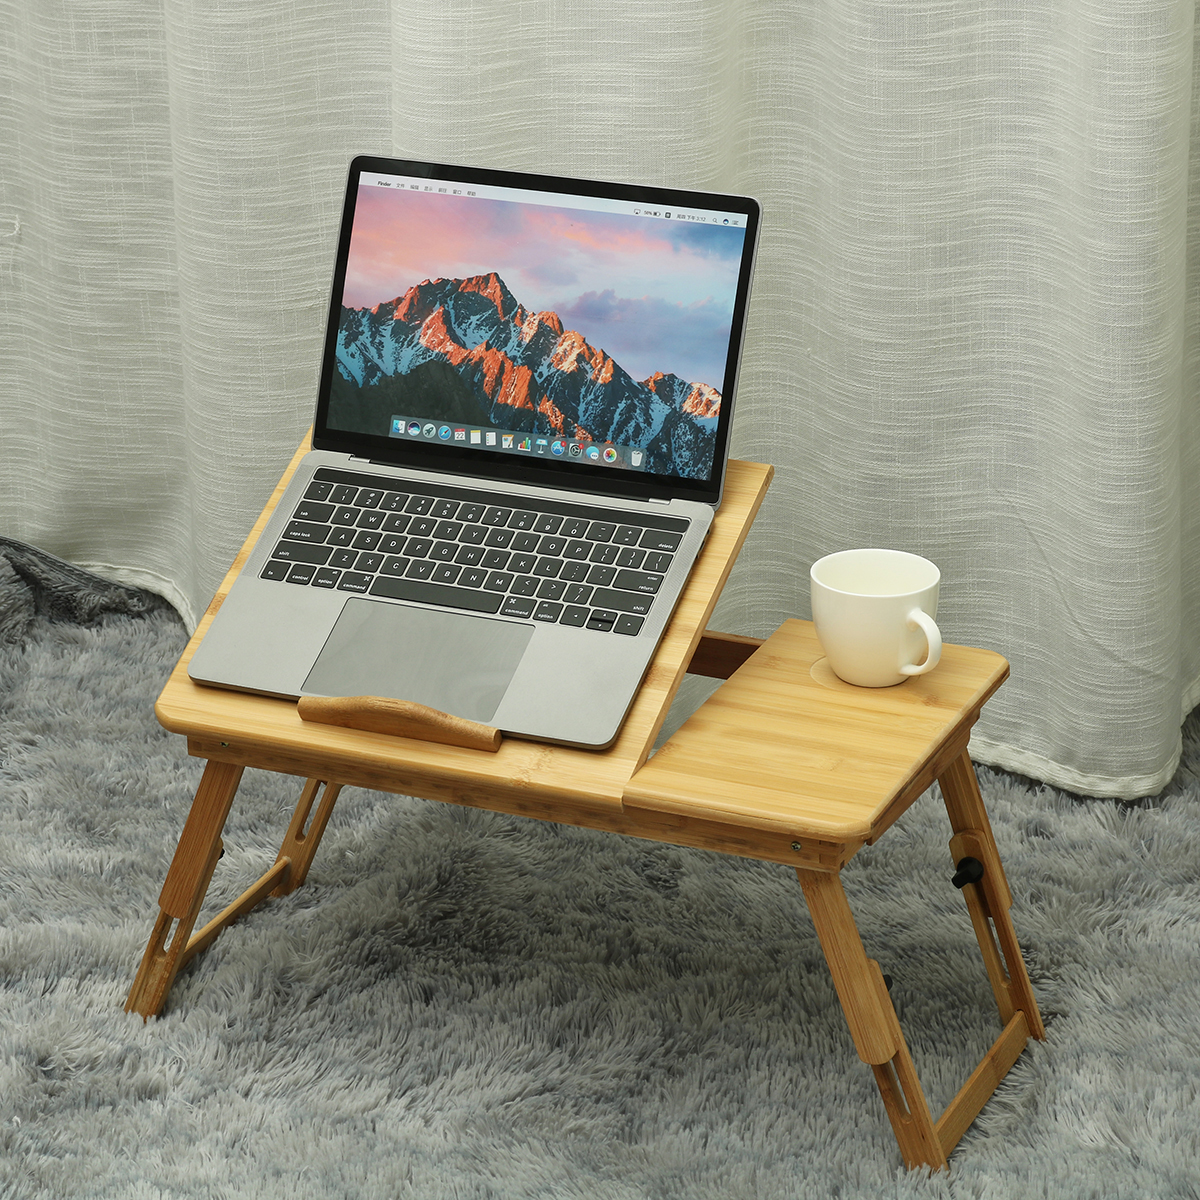 Adjustable-Laptop-Bed-Table-Stand-Computer-Desk-Sofa-Lap-Tray-wDrawer-Foldable-1754589-8